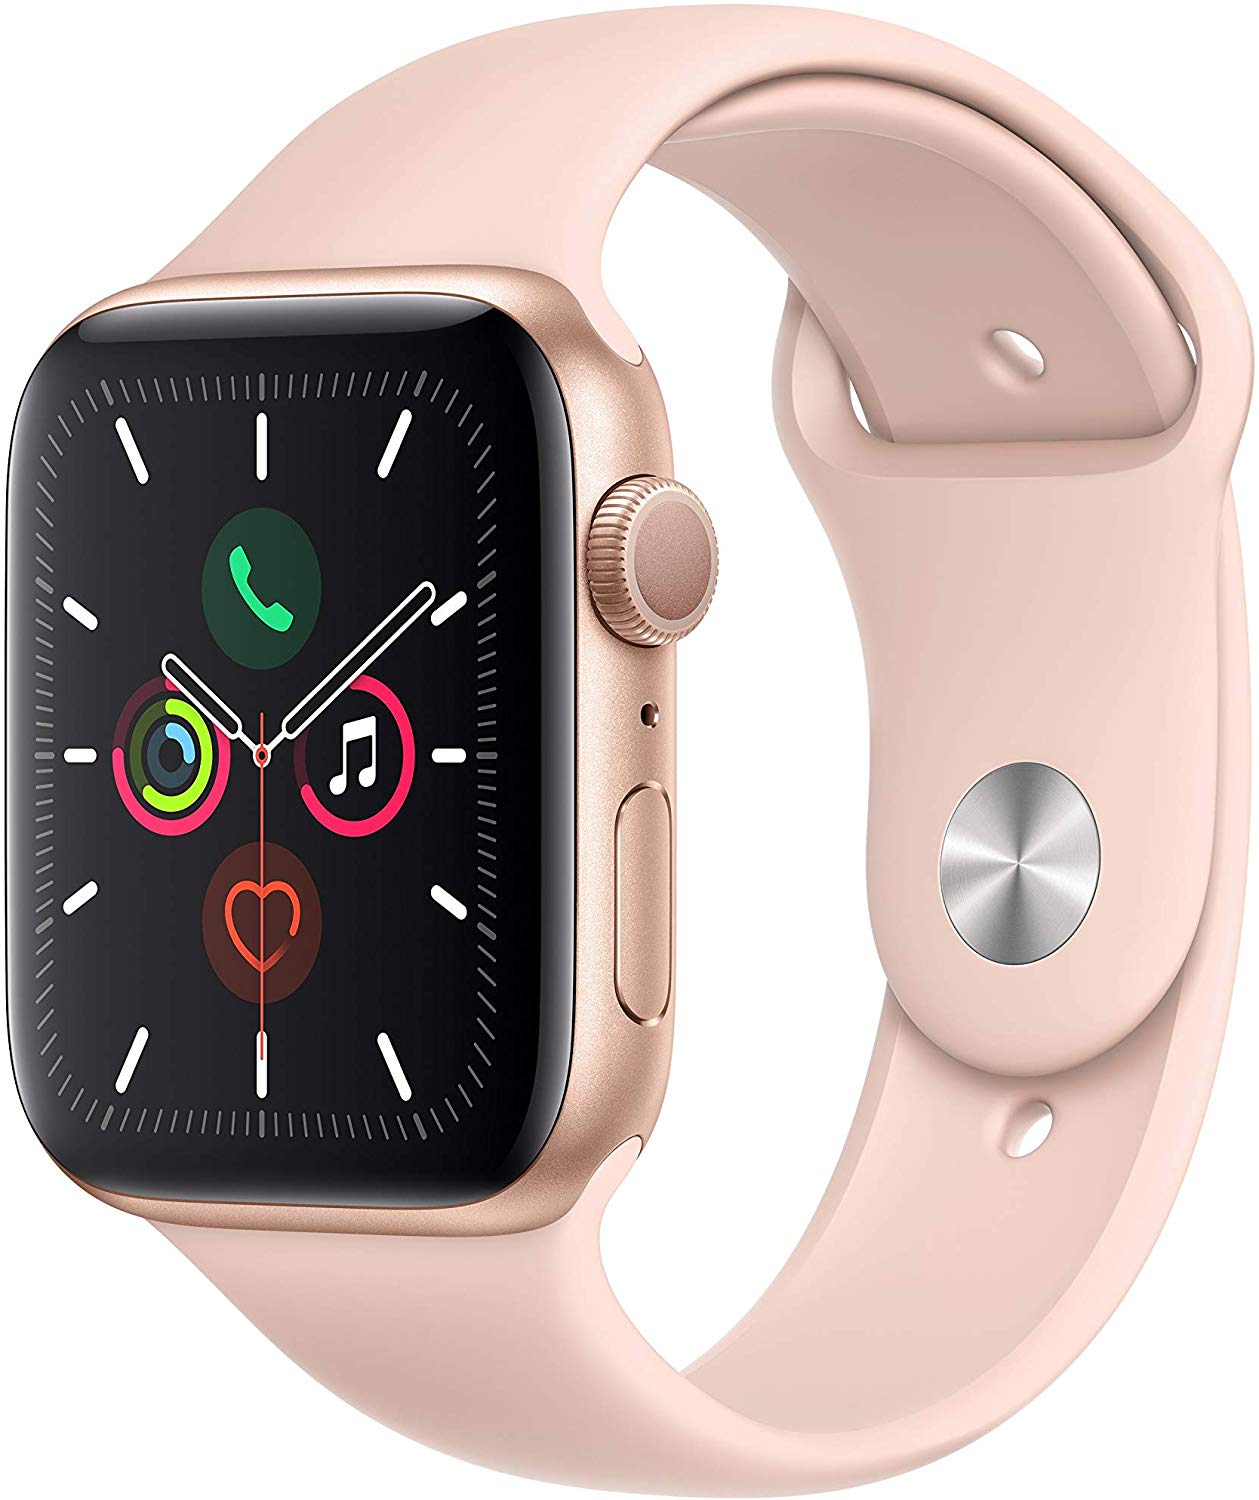 Herrie solide atoom Apple Watch Series 5 (44mm) (GPS) Specifications, Features and Price